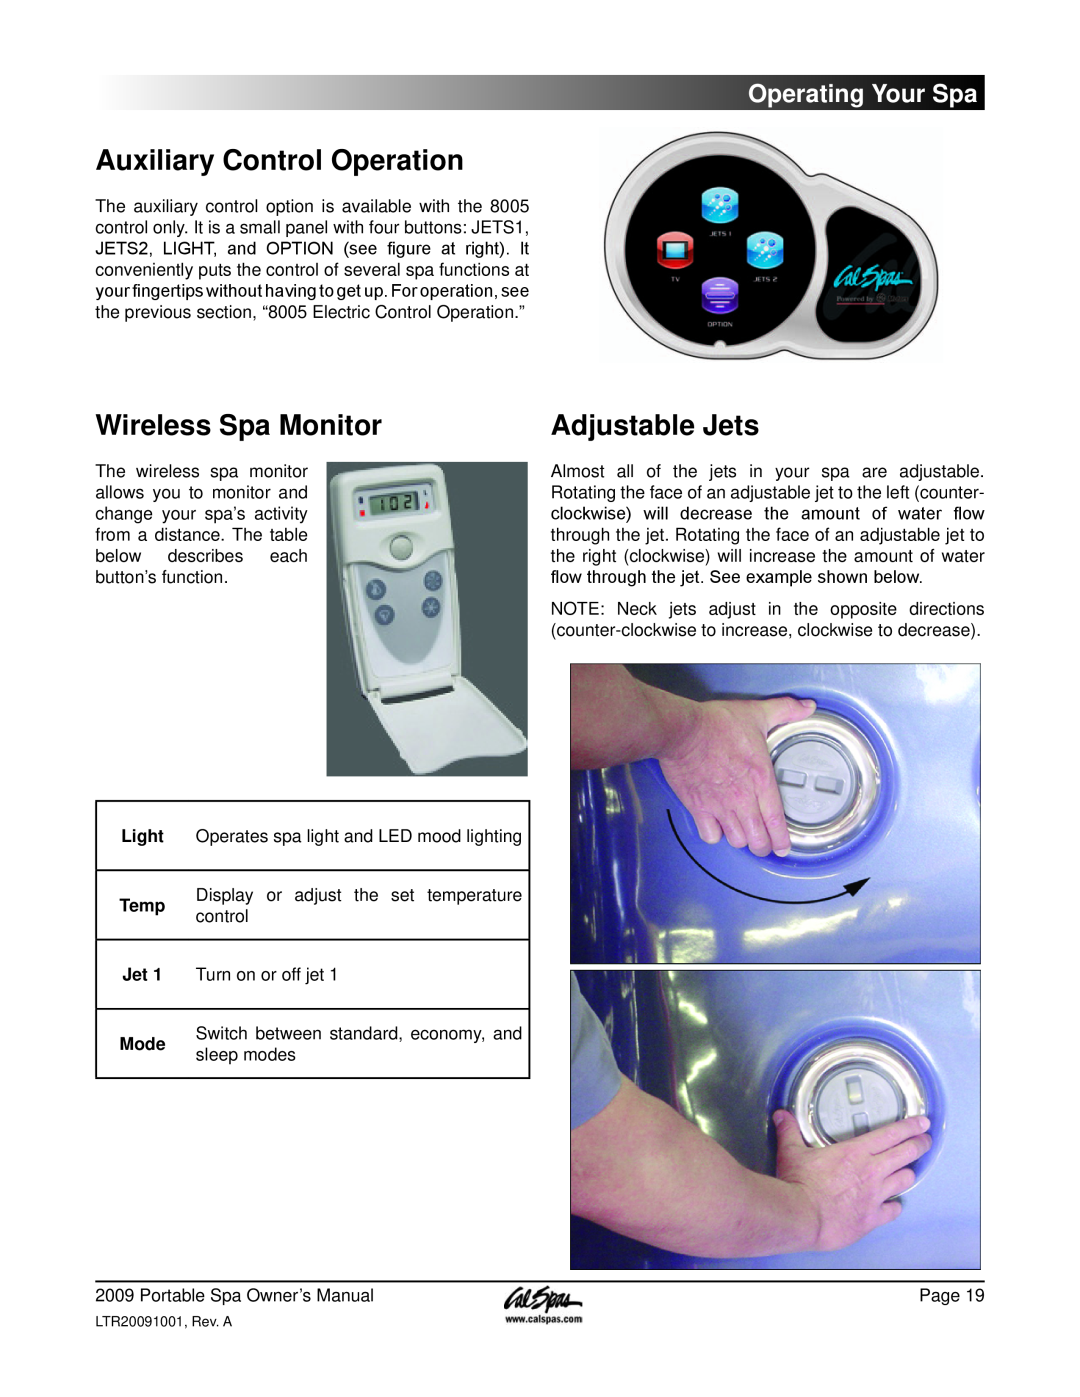 Cal Spas Portable Spas manual Auxiliary Control Operation, Wireless Spa Monitor, Adjustable Jets, Light, Temp, Mode 